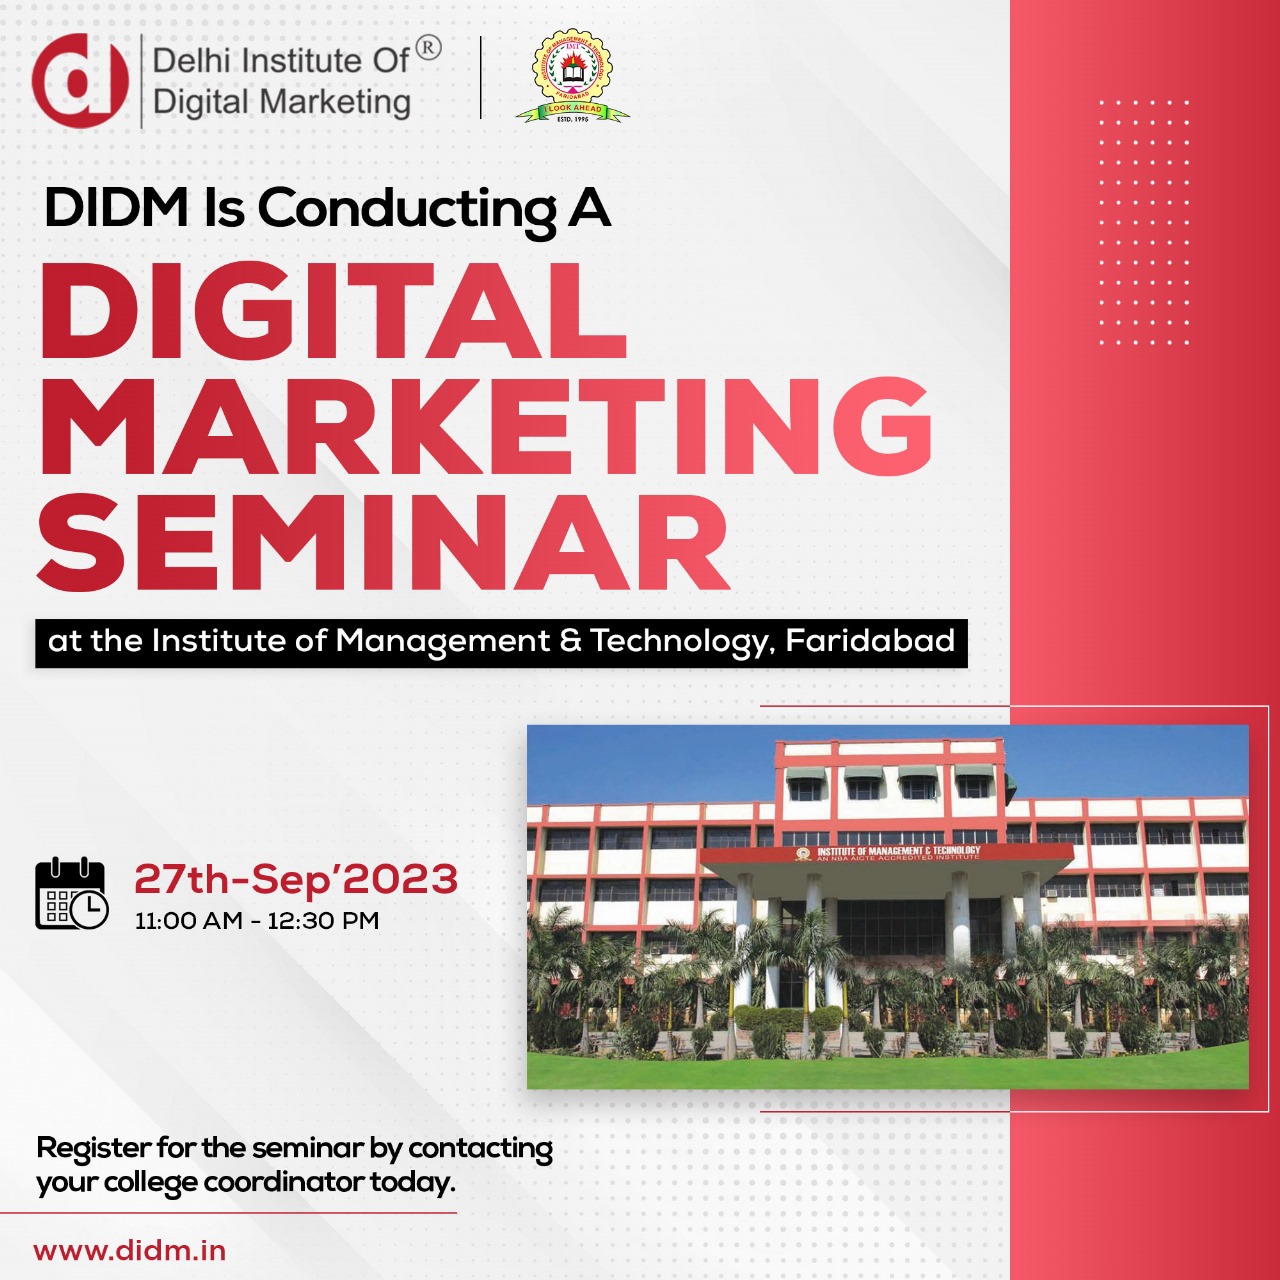 DIDM is conducting a digital marketing seminar at the Institute of Management and Technology (1)